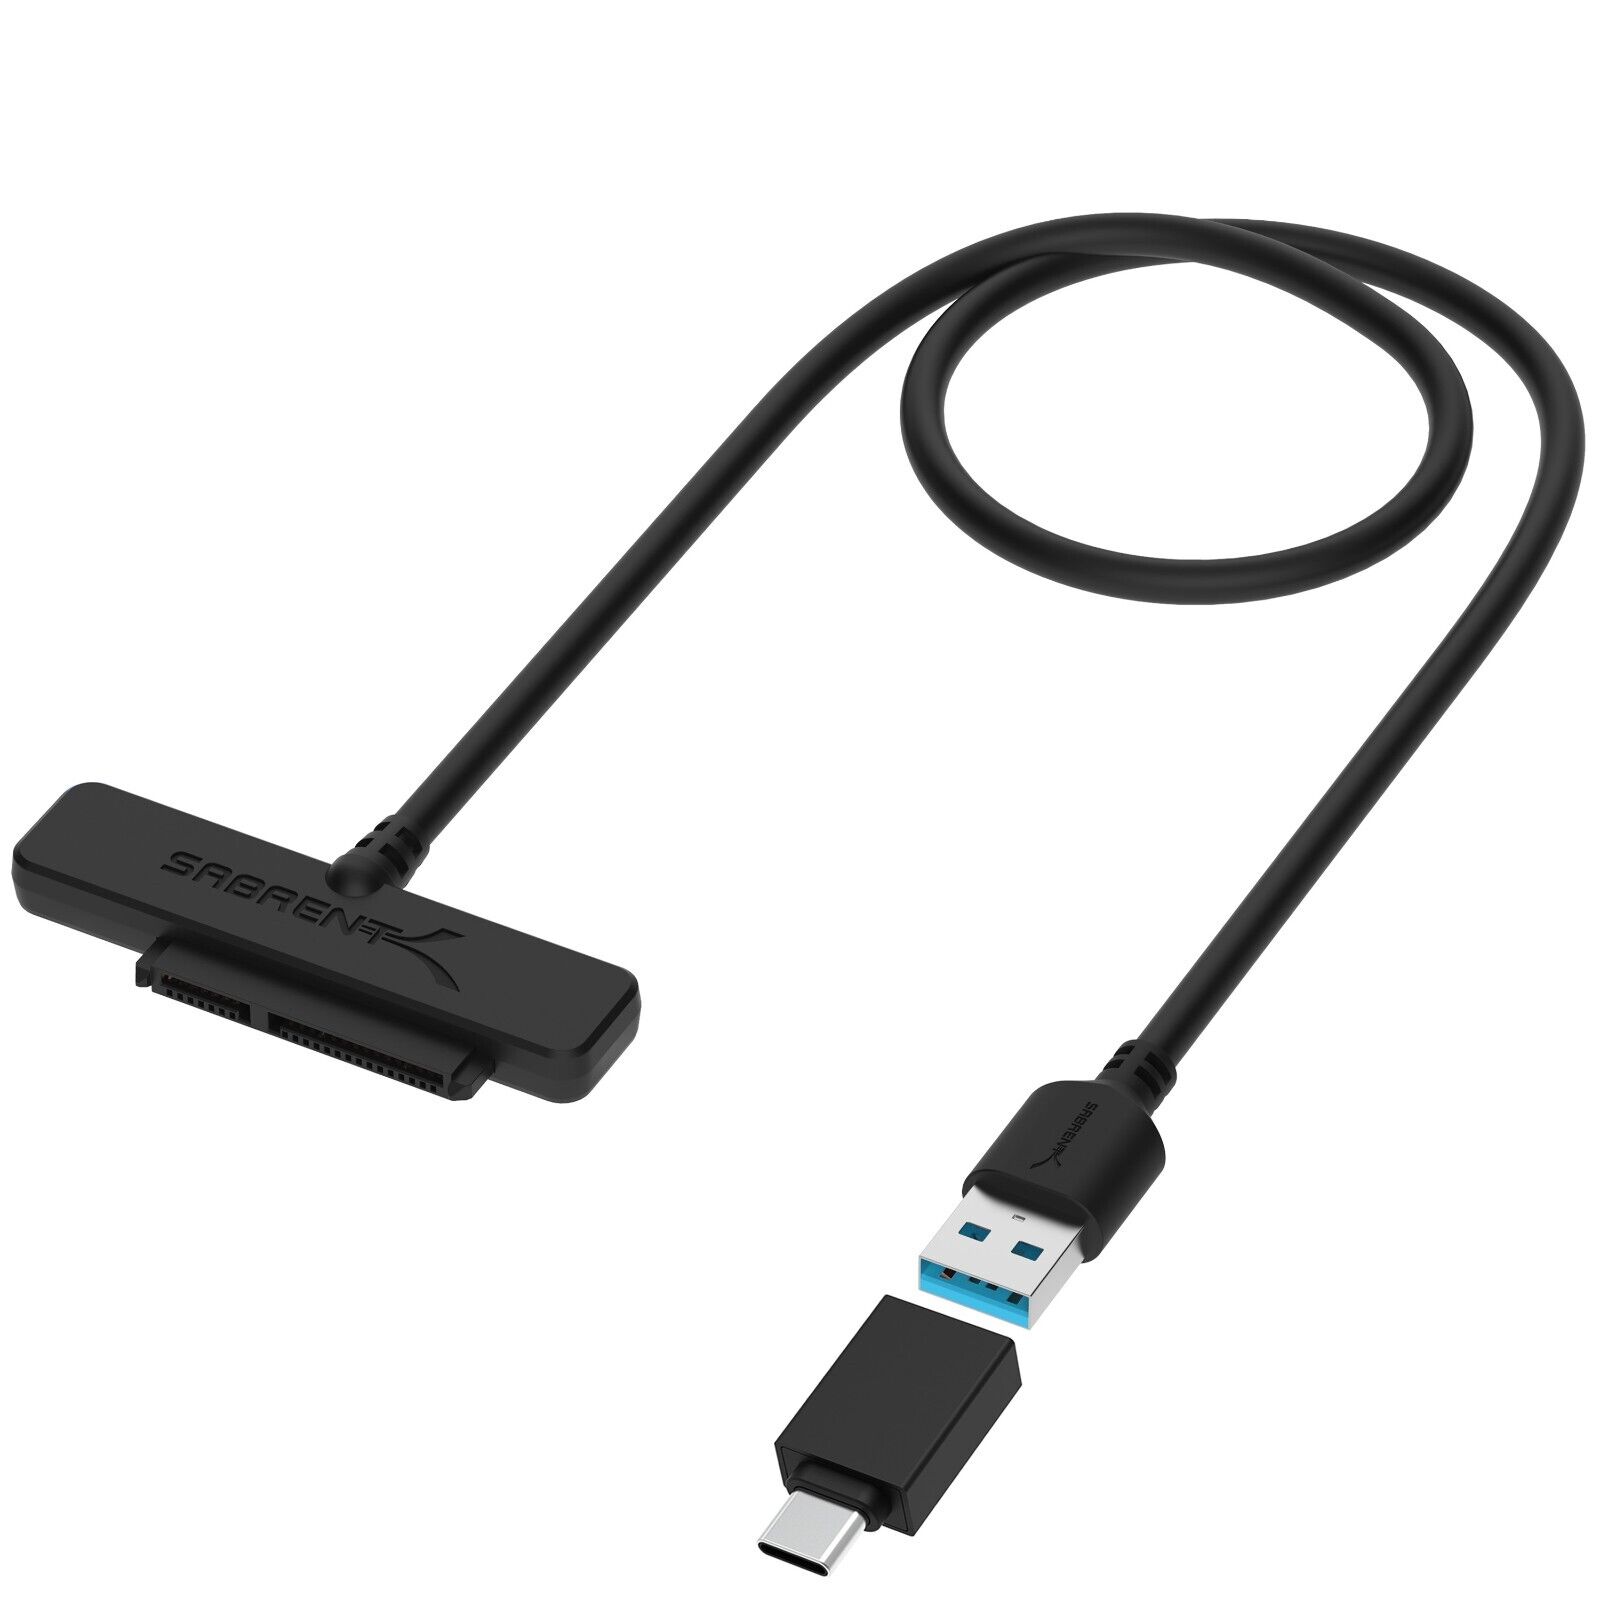 Sabrent USB 3.1 (Type-A) to SSD / 2.5-Inch SATA Hard Drive Adapter (EC-SS31)